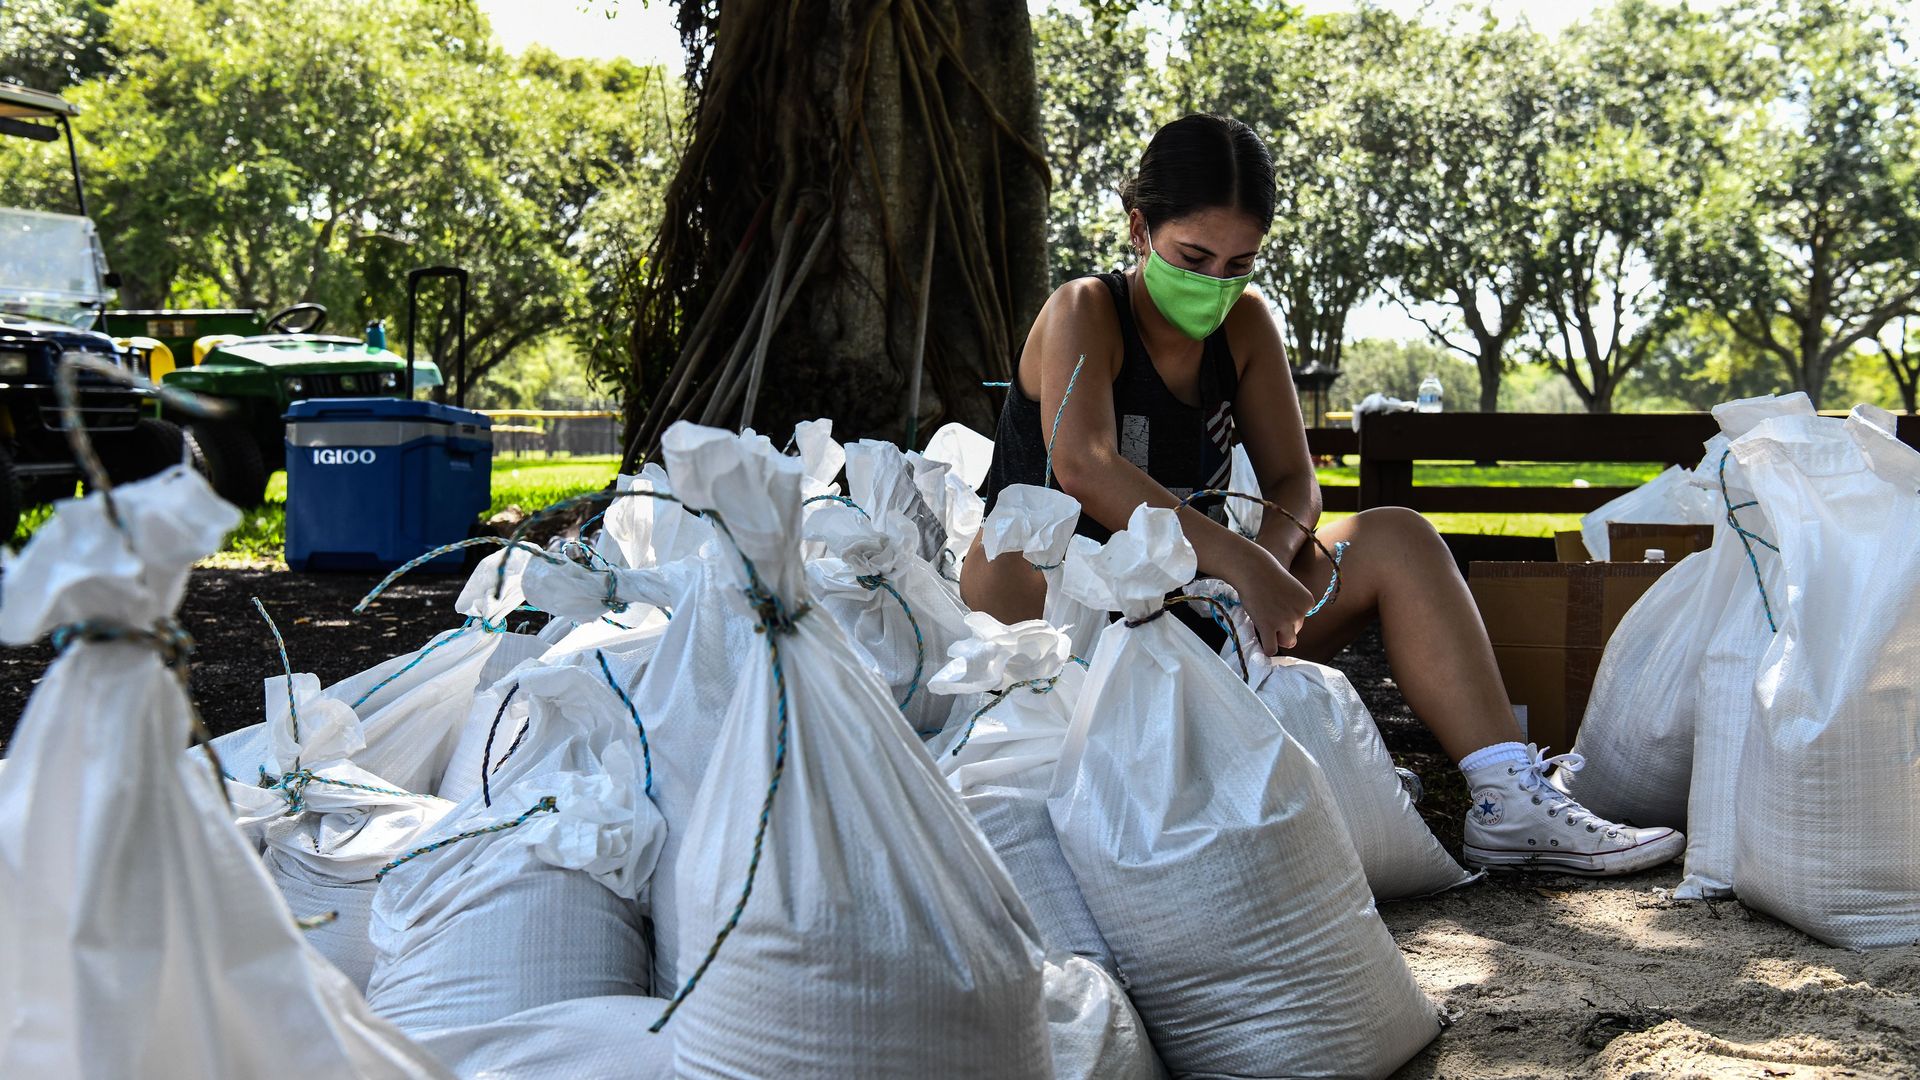 A woman prepares sand bags for distribution to the residents of Palmetto Bay near Miami on July 31, 2020 as Floridians prepared for a hurricane. Photo: Chandan Khanna/AFP via Getty Images